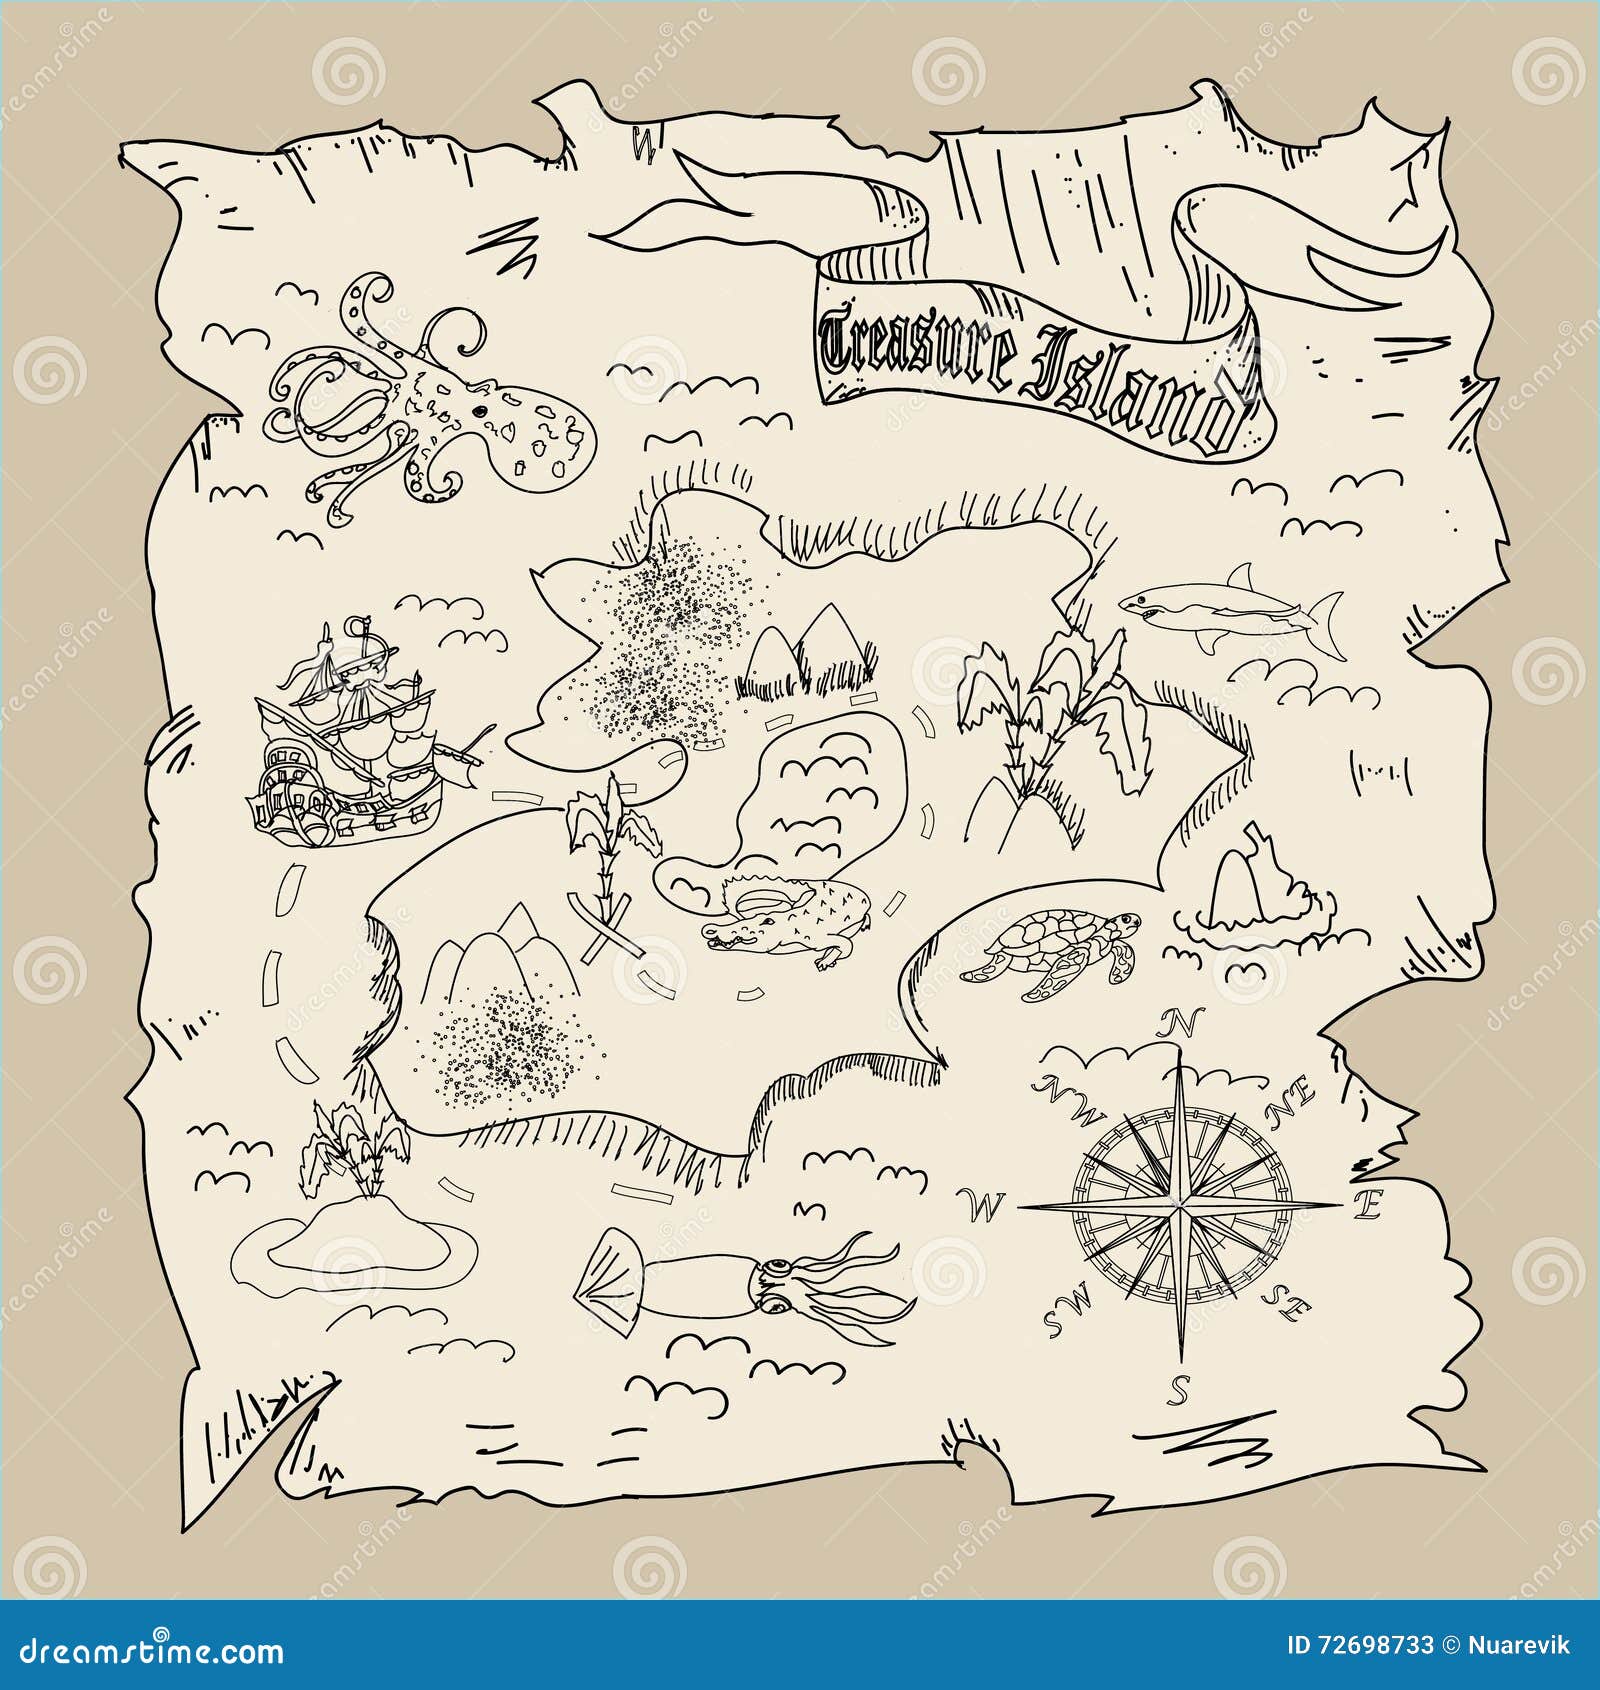 treasure island map kids coloring page stock illustration illustration of banner palm 72698733